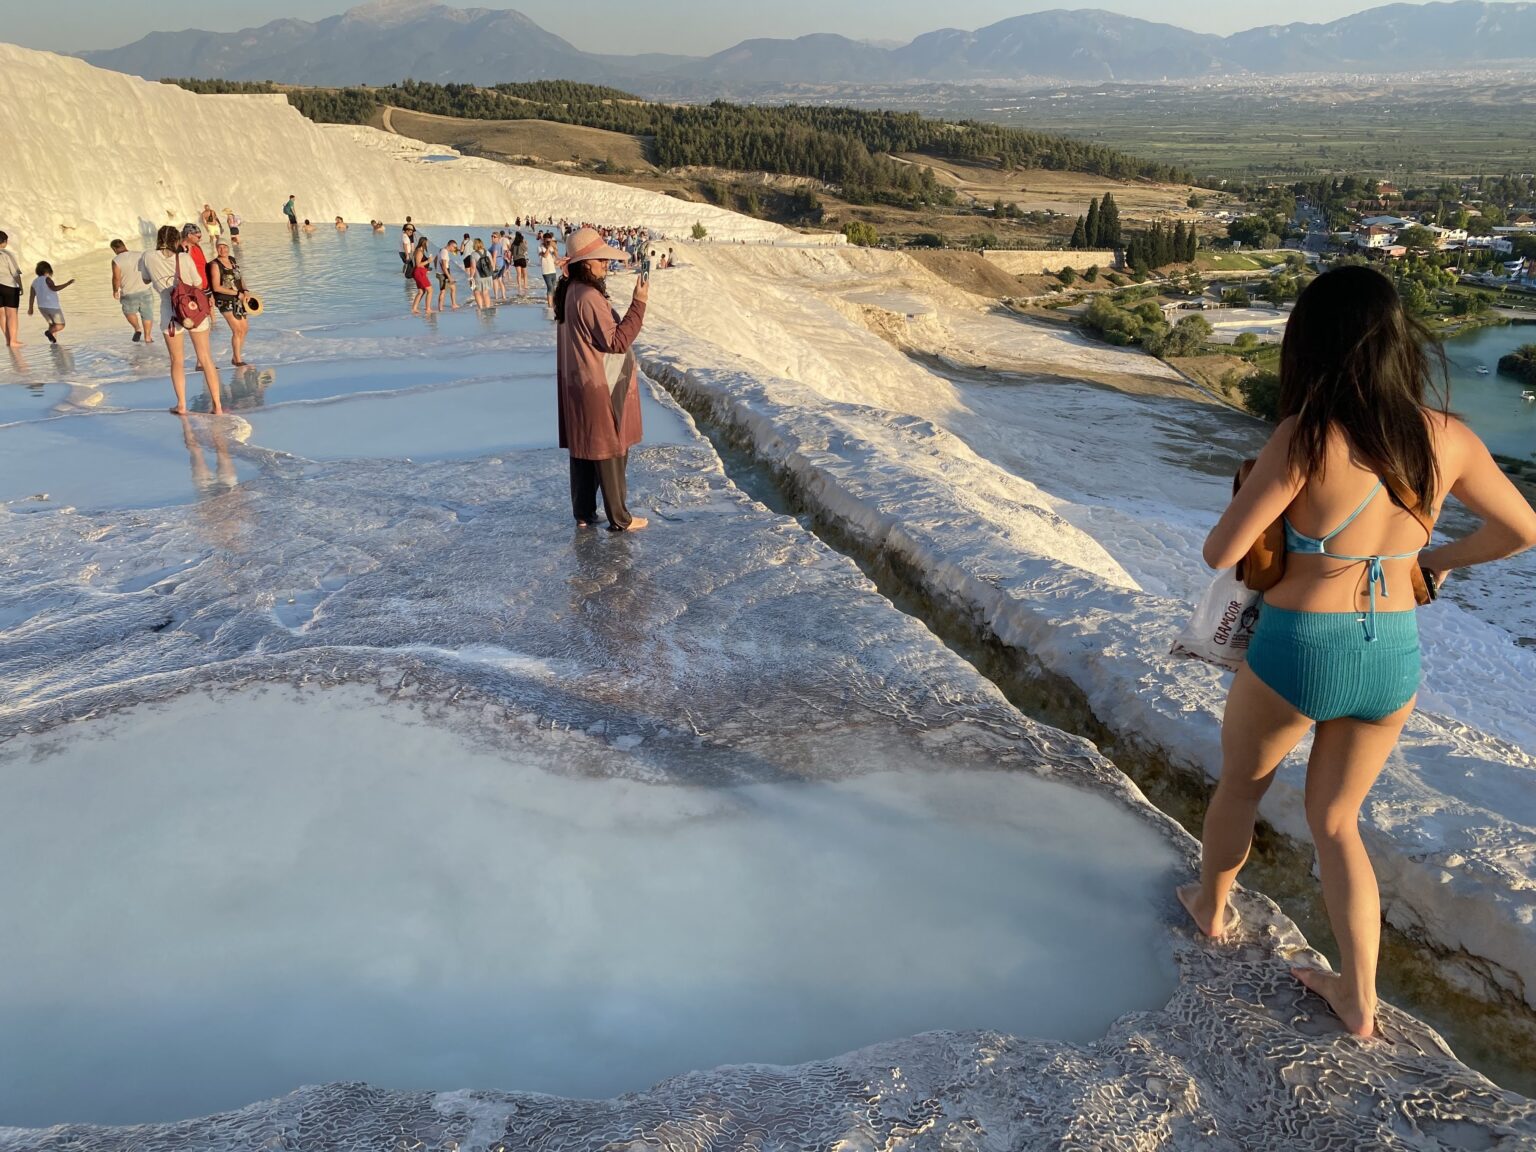 Many visitors chose to spend the entire day relaxing in the area, visiting the ruins in the afternoon, and taking advantage of the sunset light for their final thermal springs photos. Annie Chen photos.